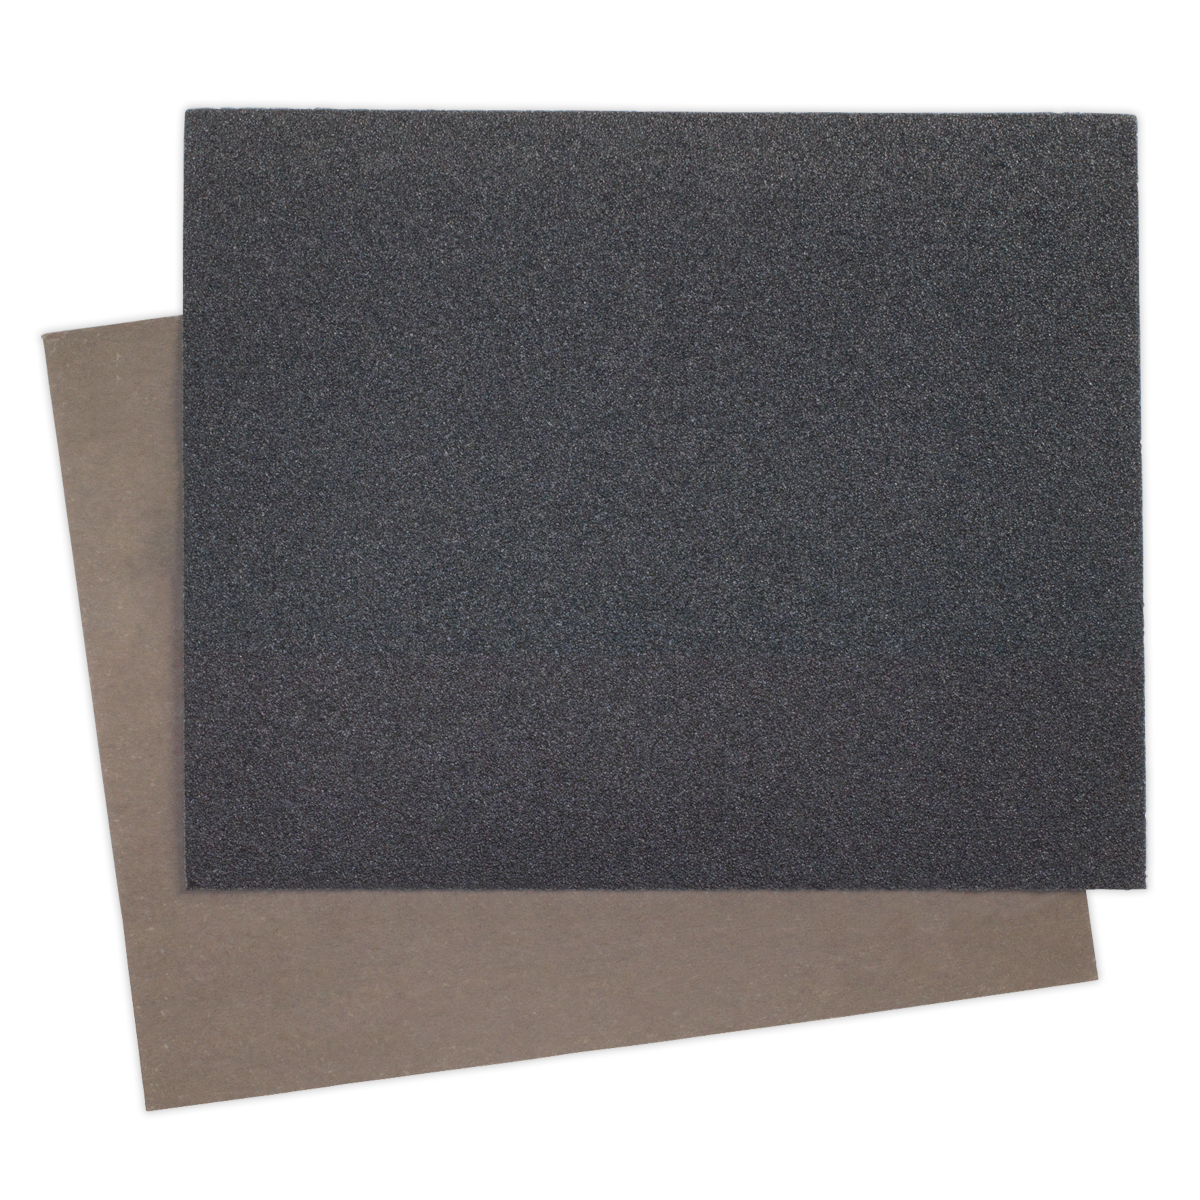 Wet & Dry Paper 230 x 280mm 320Grit Pack of 25